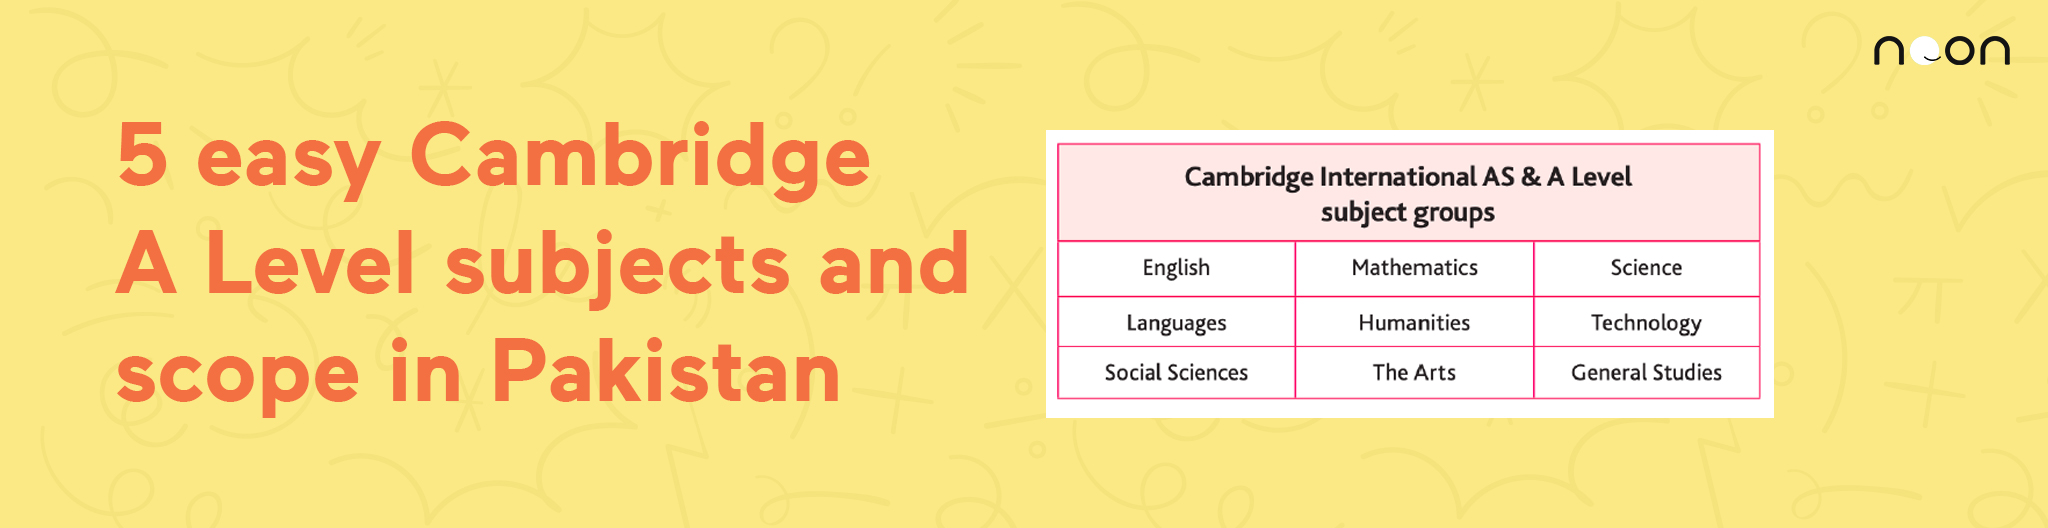 5 easy Cambridge A Level subjects and scope in Pakistan